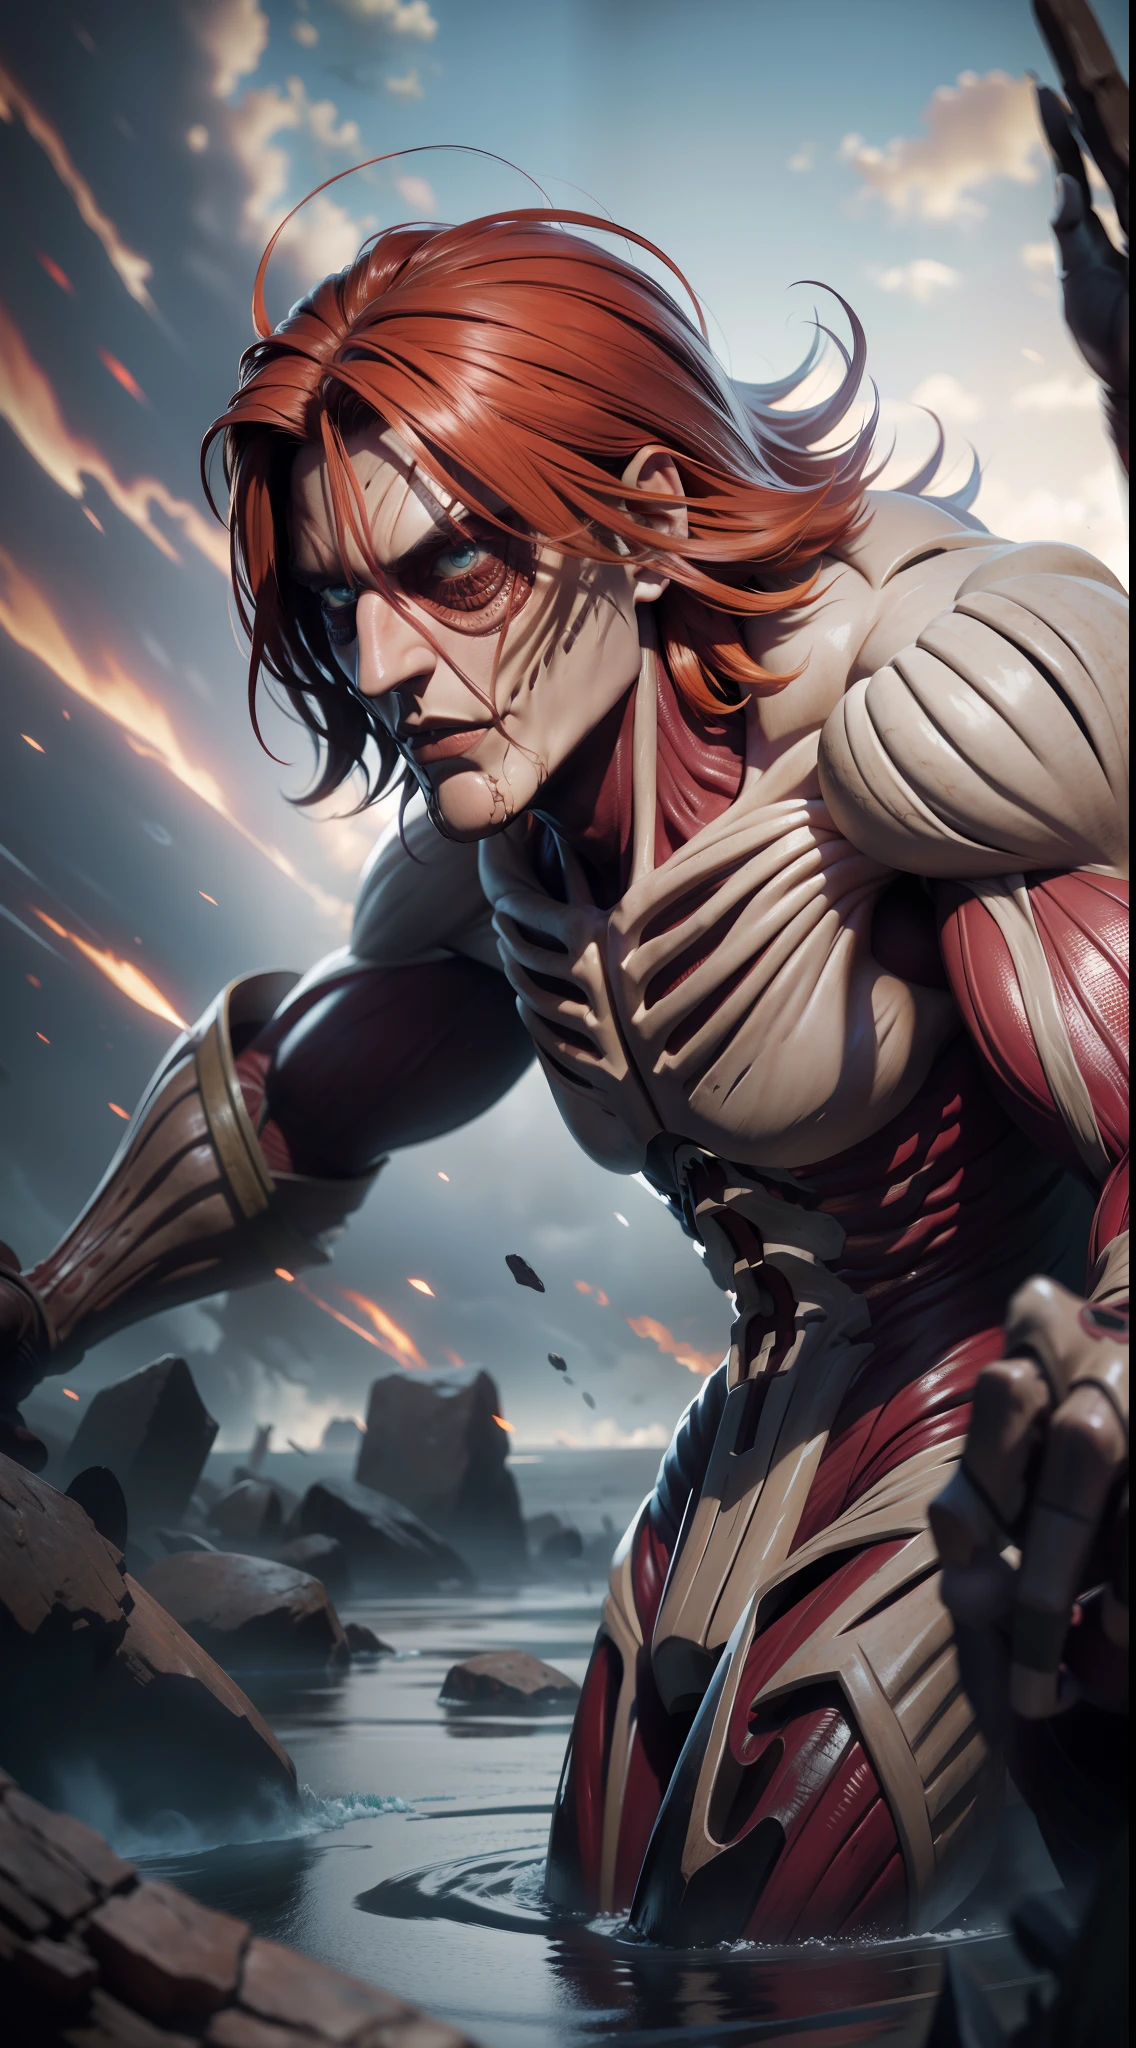 Imagining Giant Shanks in the world of Attack on Titan evokes a majestic and formidable presence. Enlarged to Titan proportions, Shanks' iconic red hair and dominating aura will remain unmistakable, and his severed hand. With his enormous stature, he exuded a sense of power and strength, similar to the Titans themselves. Shanks' quiet confidence and legendary status will shape his interactions with the Titan threat, casting an air of mystery and intrigue. This massive Shanks symbolizes the fusion of his pirate captain's charisma and the mystical nature of the Attack on Titan universe, leaving an indelible mark on the crossover landscape.made in octane, cinematic, ultra-realistic, extremely detailed octane rendering, 8k,dramatic lighting ray tracing reflections, unreal render